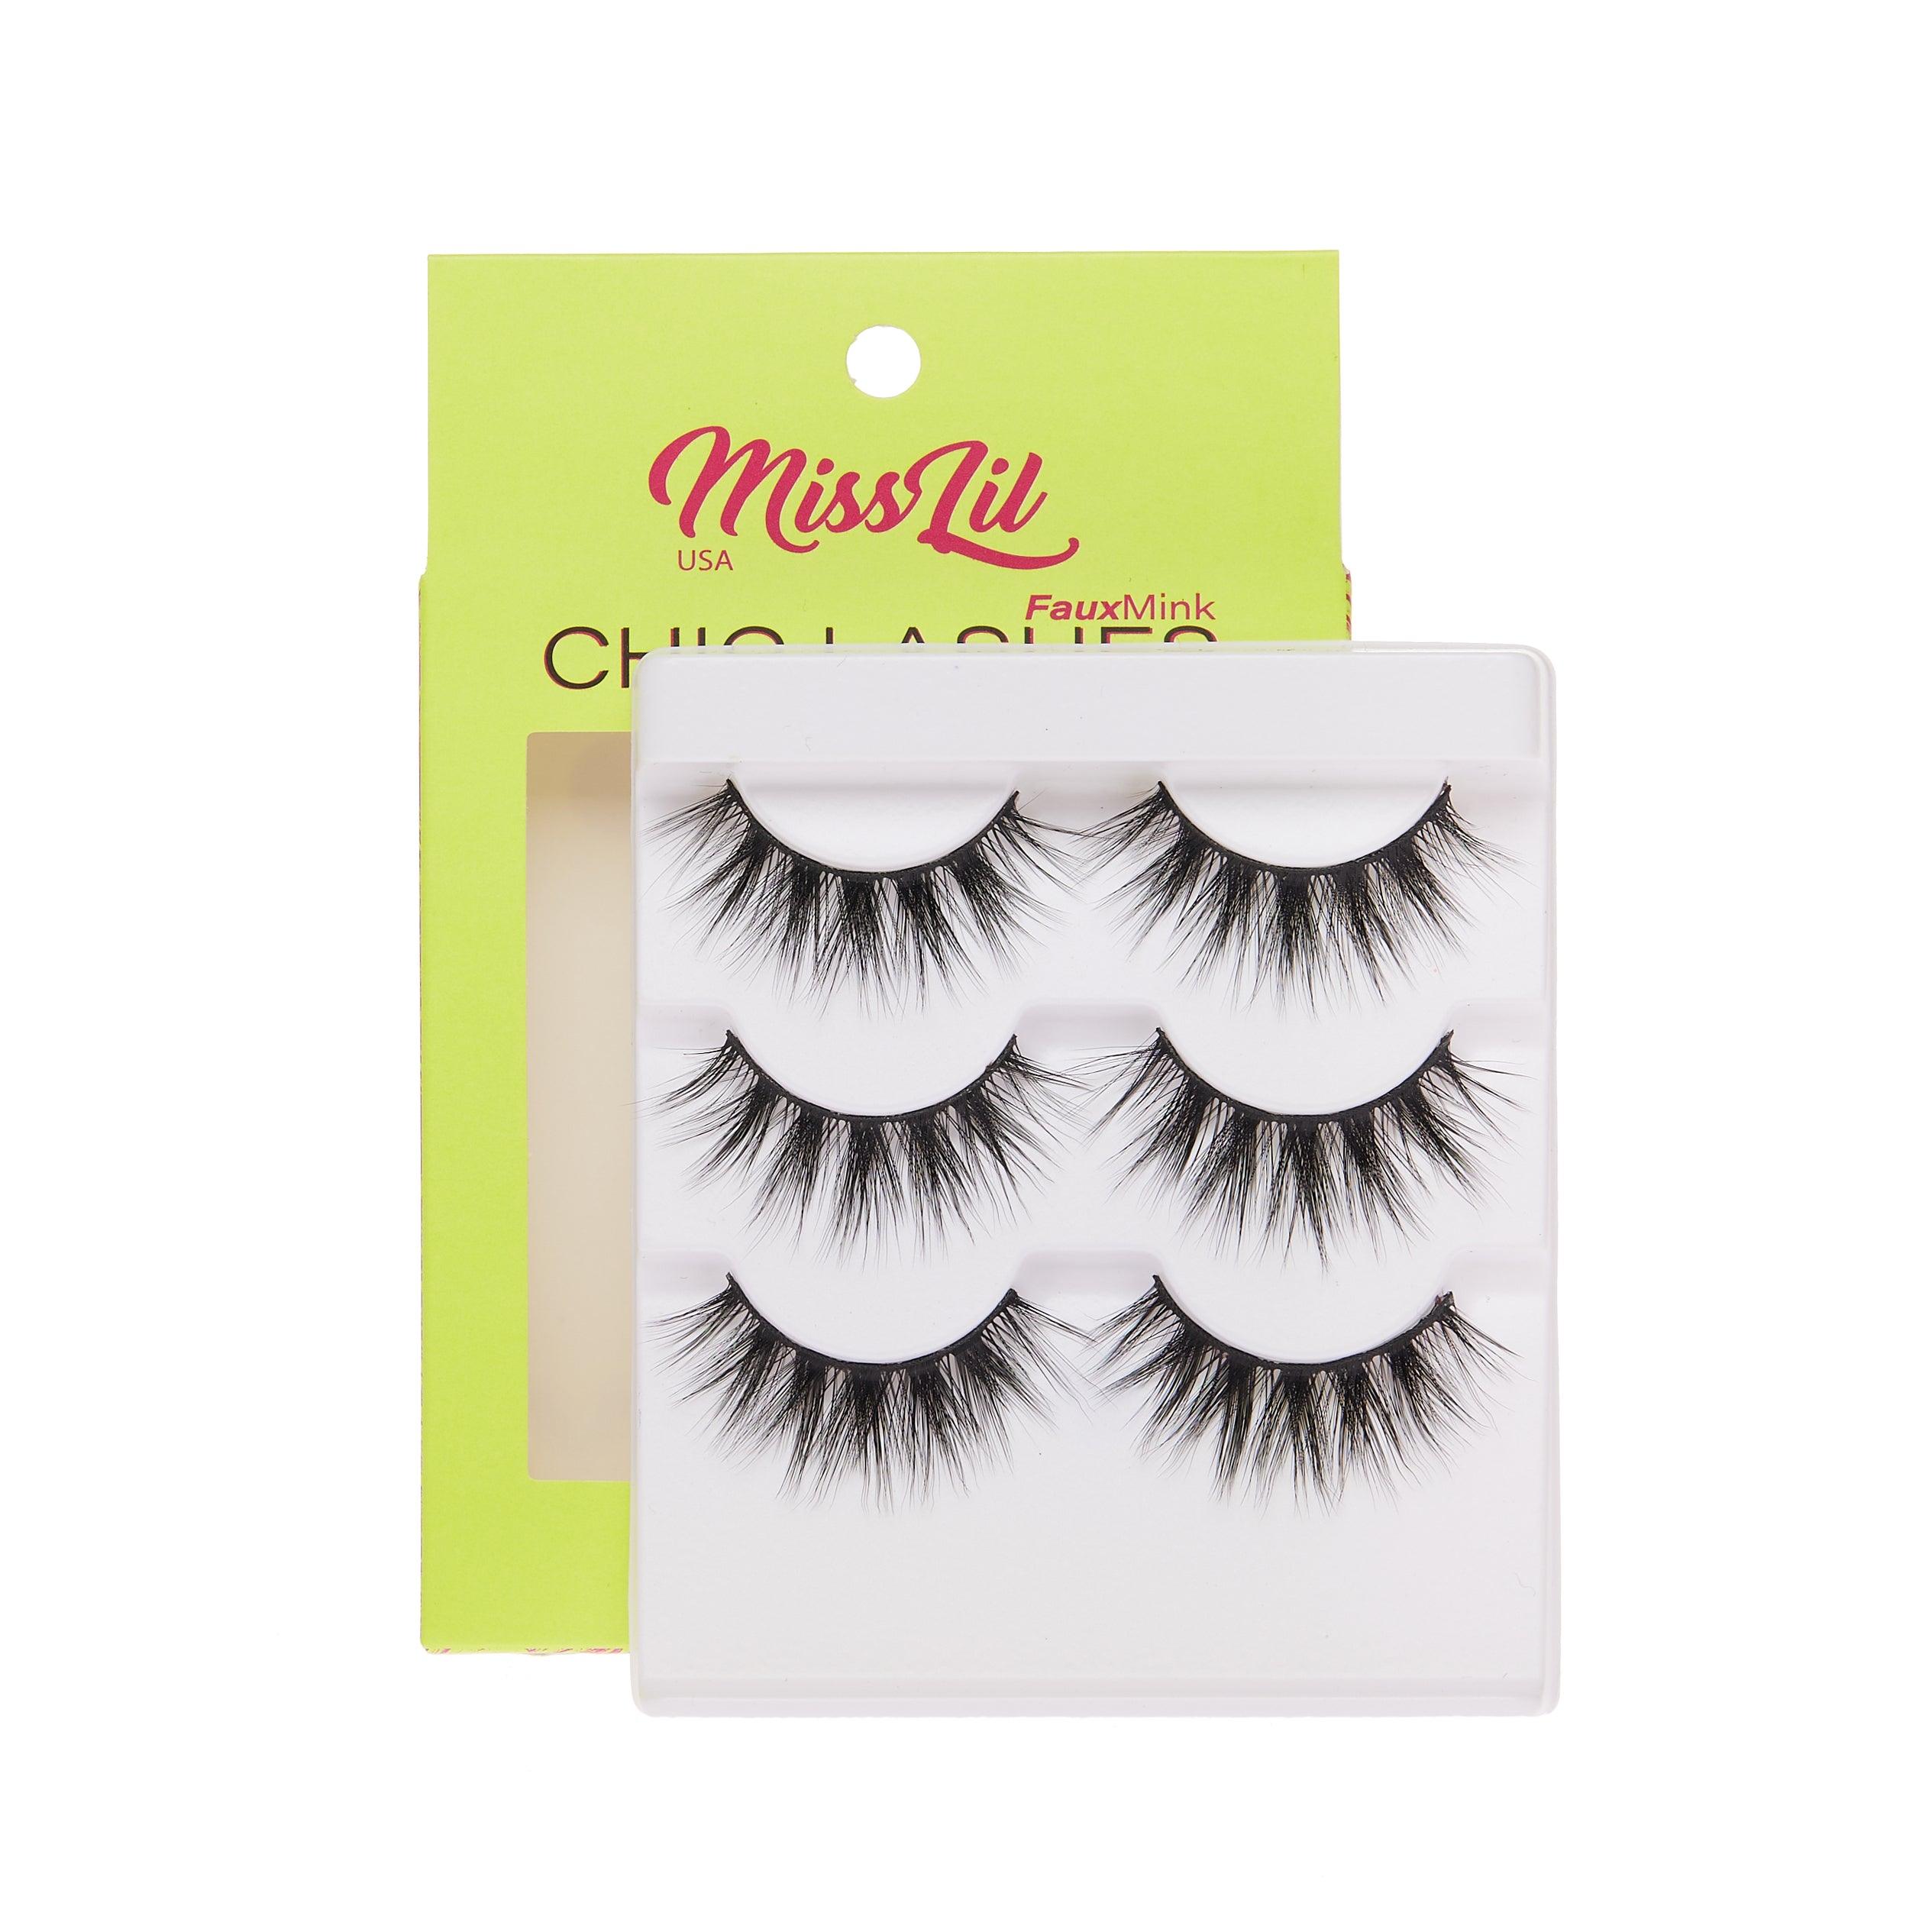 3-Pair Faux Mink Eyelashes - Chic Lashes Collection #36 - Pack of 3 - Miss Lil USA